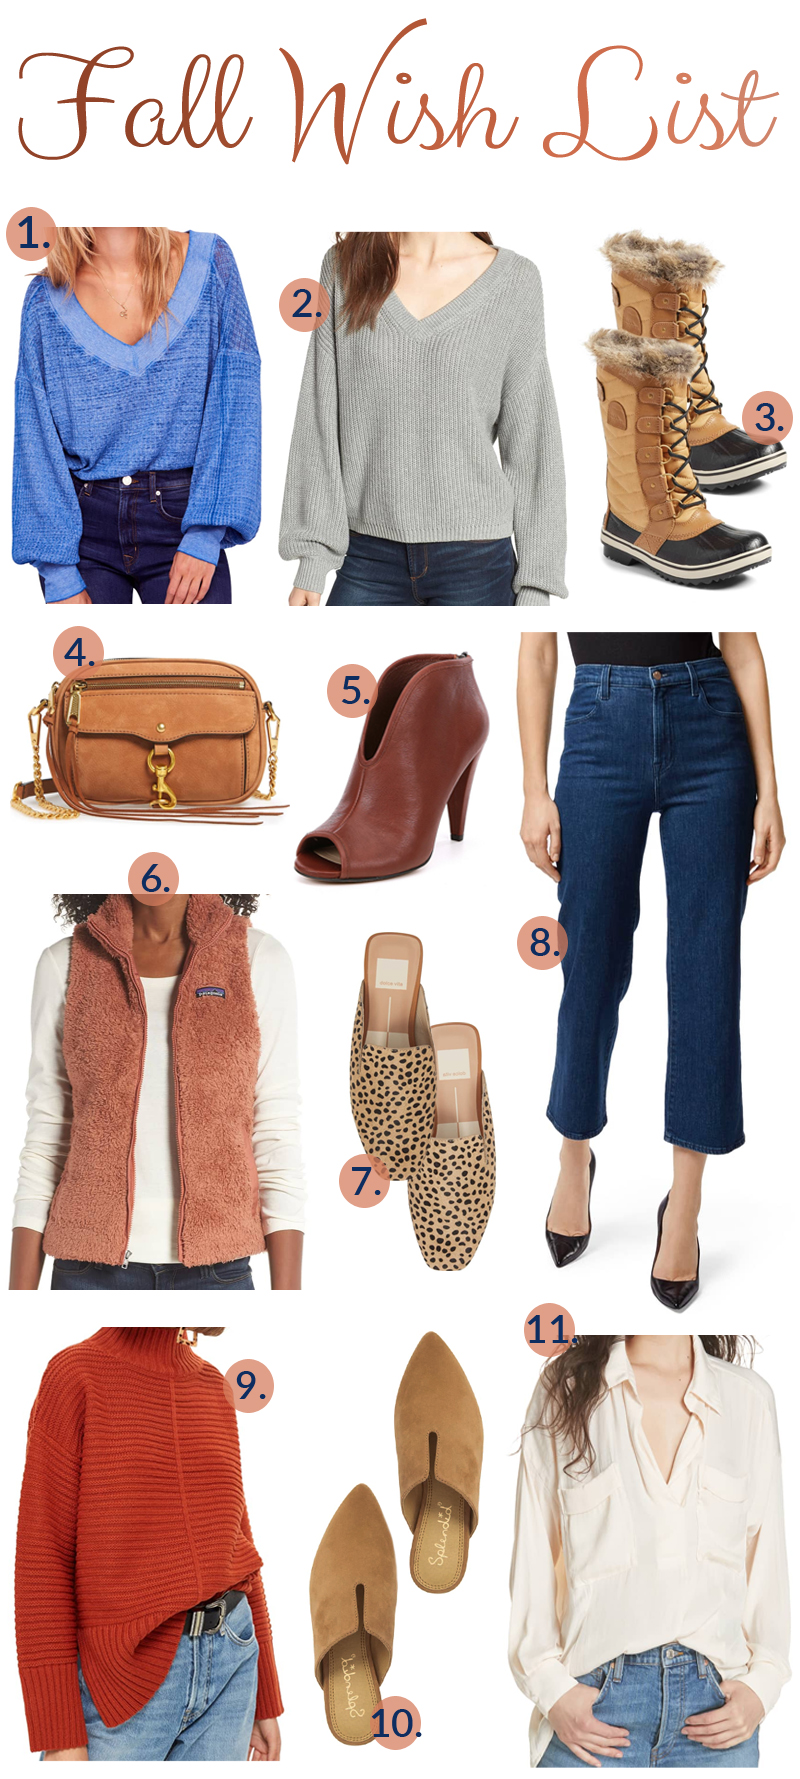 Fall Fashion Wish List featured by popular fashion blogger, Walking in Memphis in High Heels